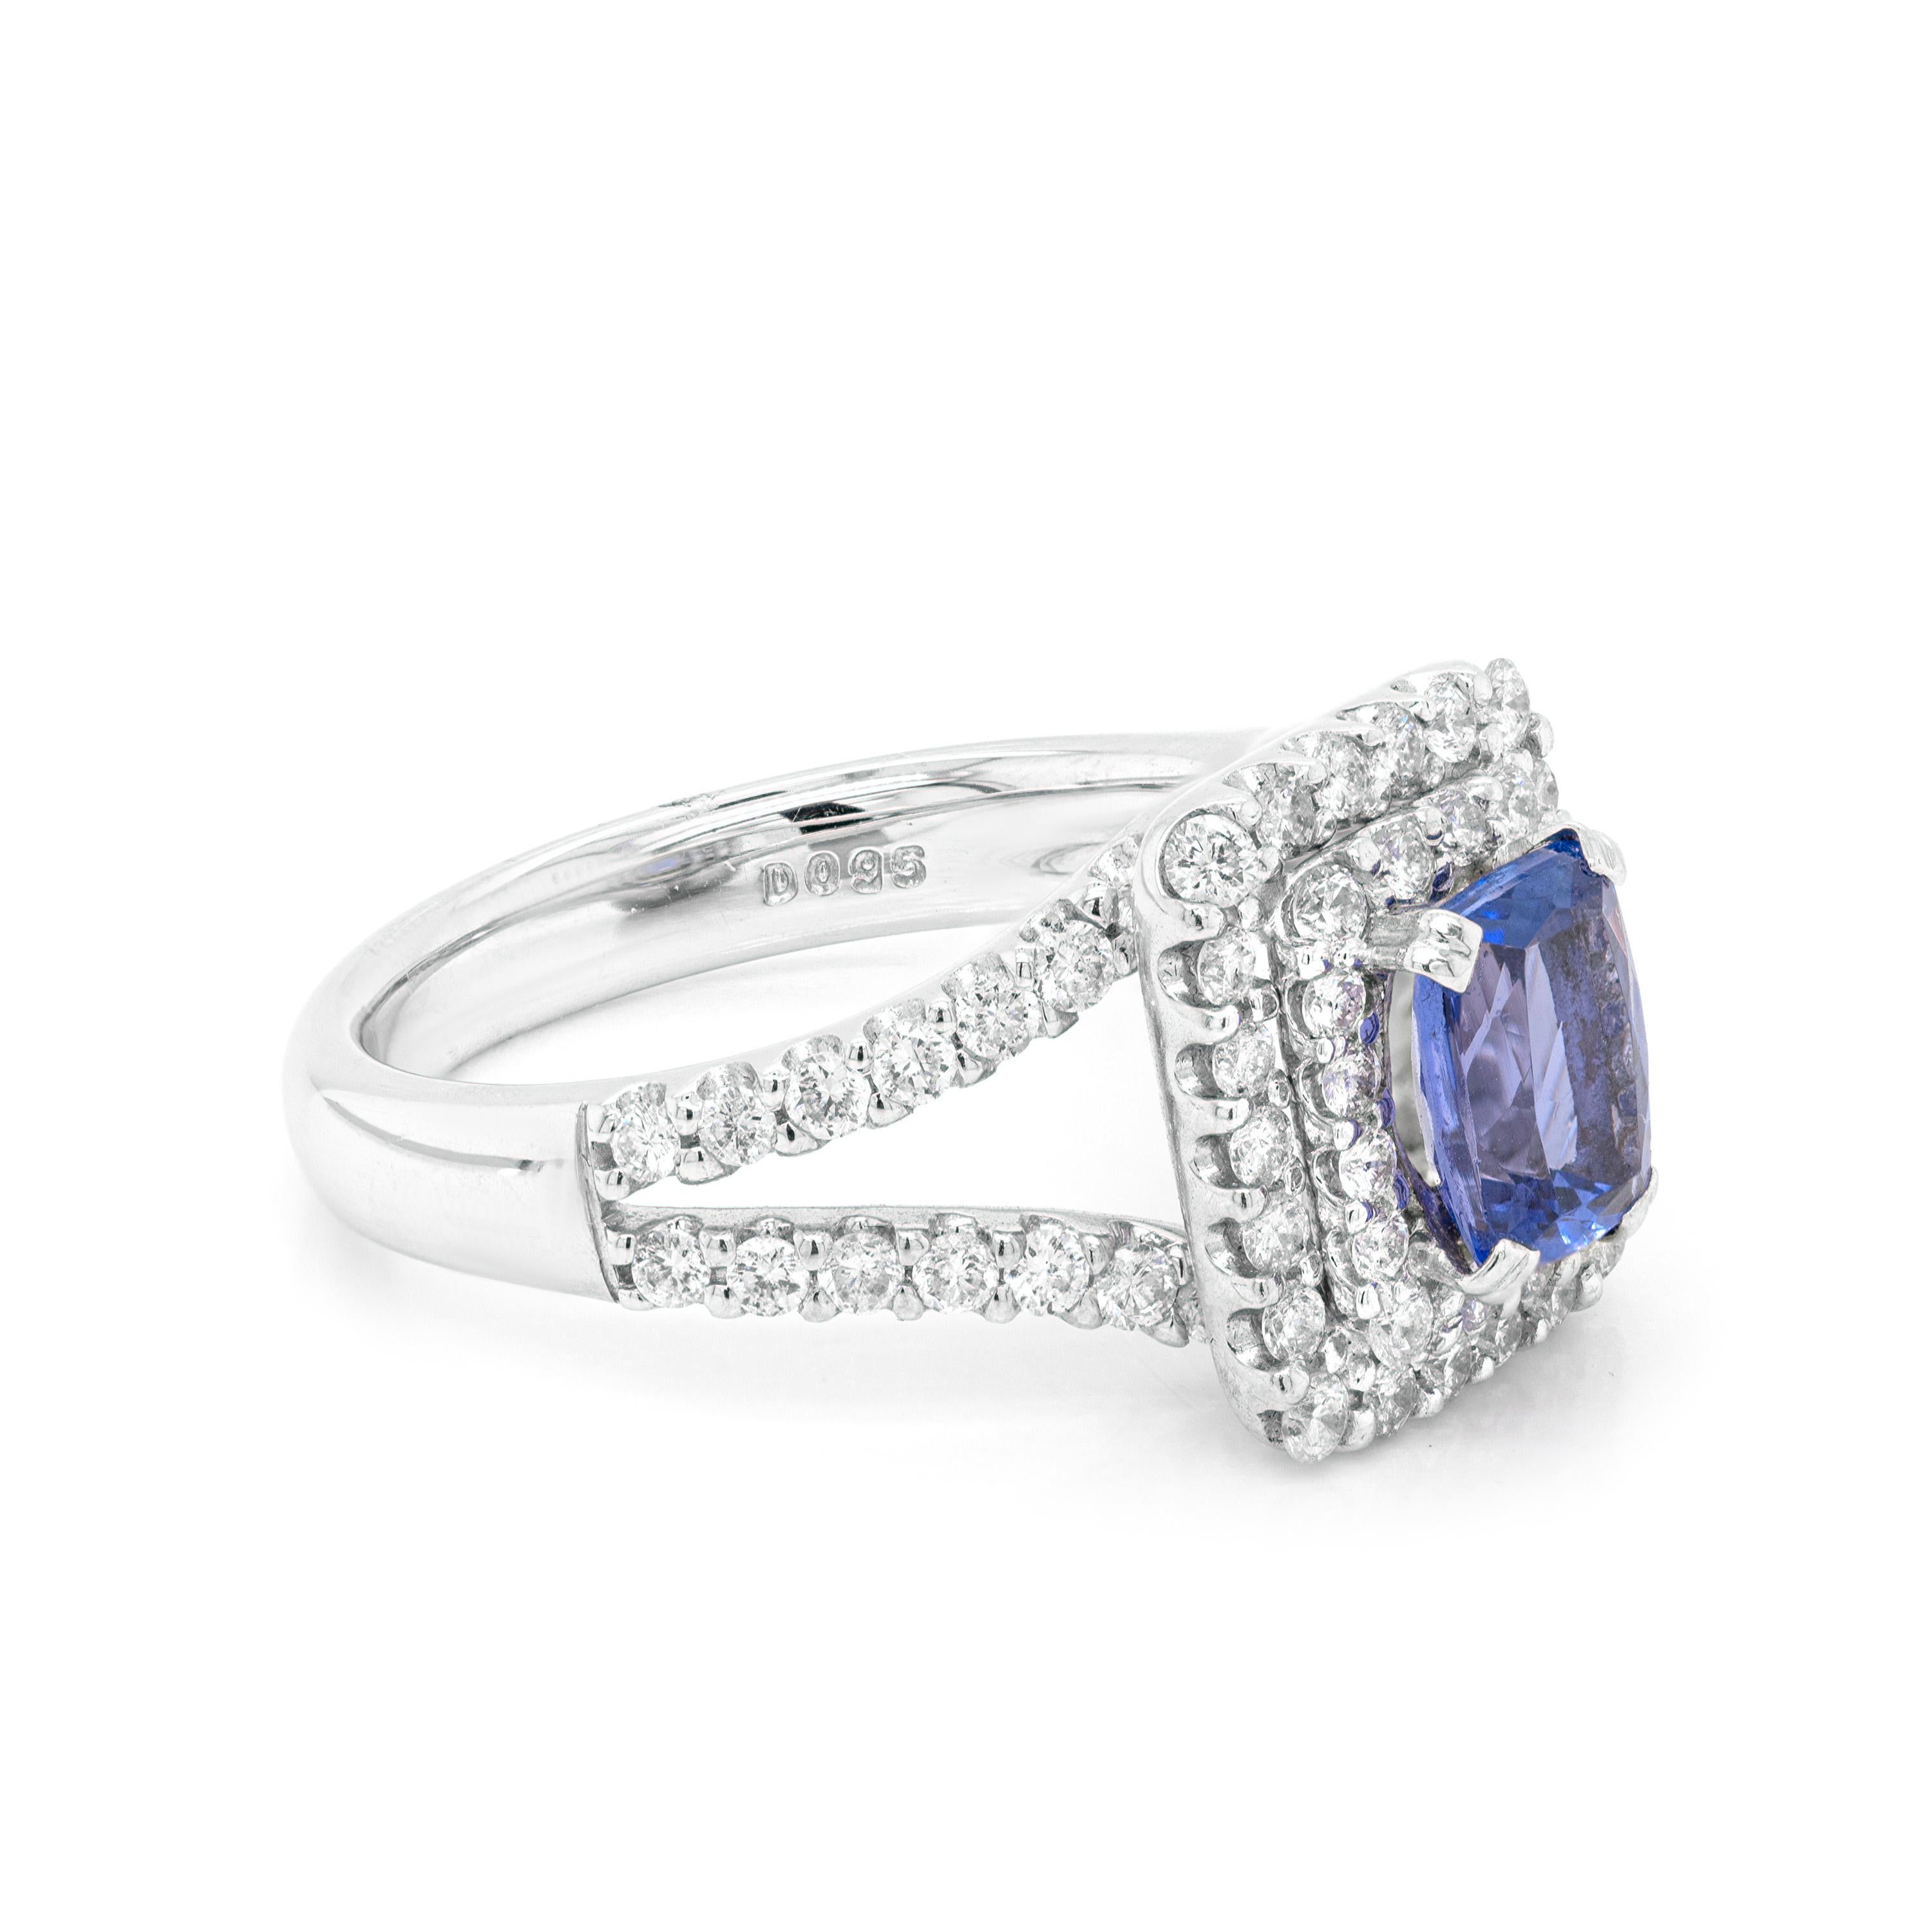 This exquisite 18 carat white gold engagement ring features a wonderful 1.13ct cushion shaped tanzanite mounted in a four claw, open back setting. The vivid stone is surrounded by a rectangular double halo of 38 round brilliant cut diamonds,